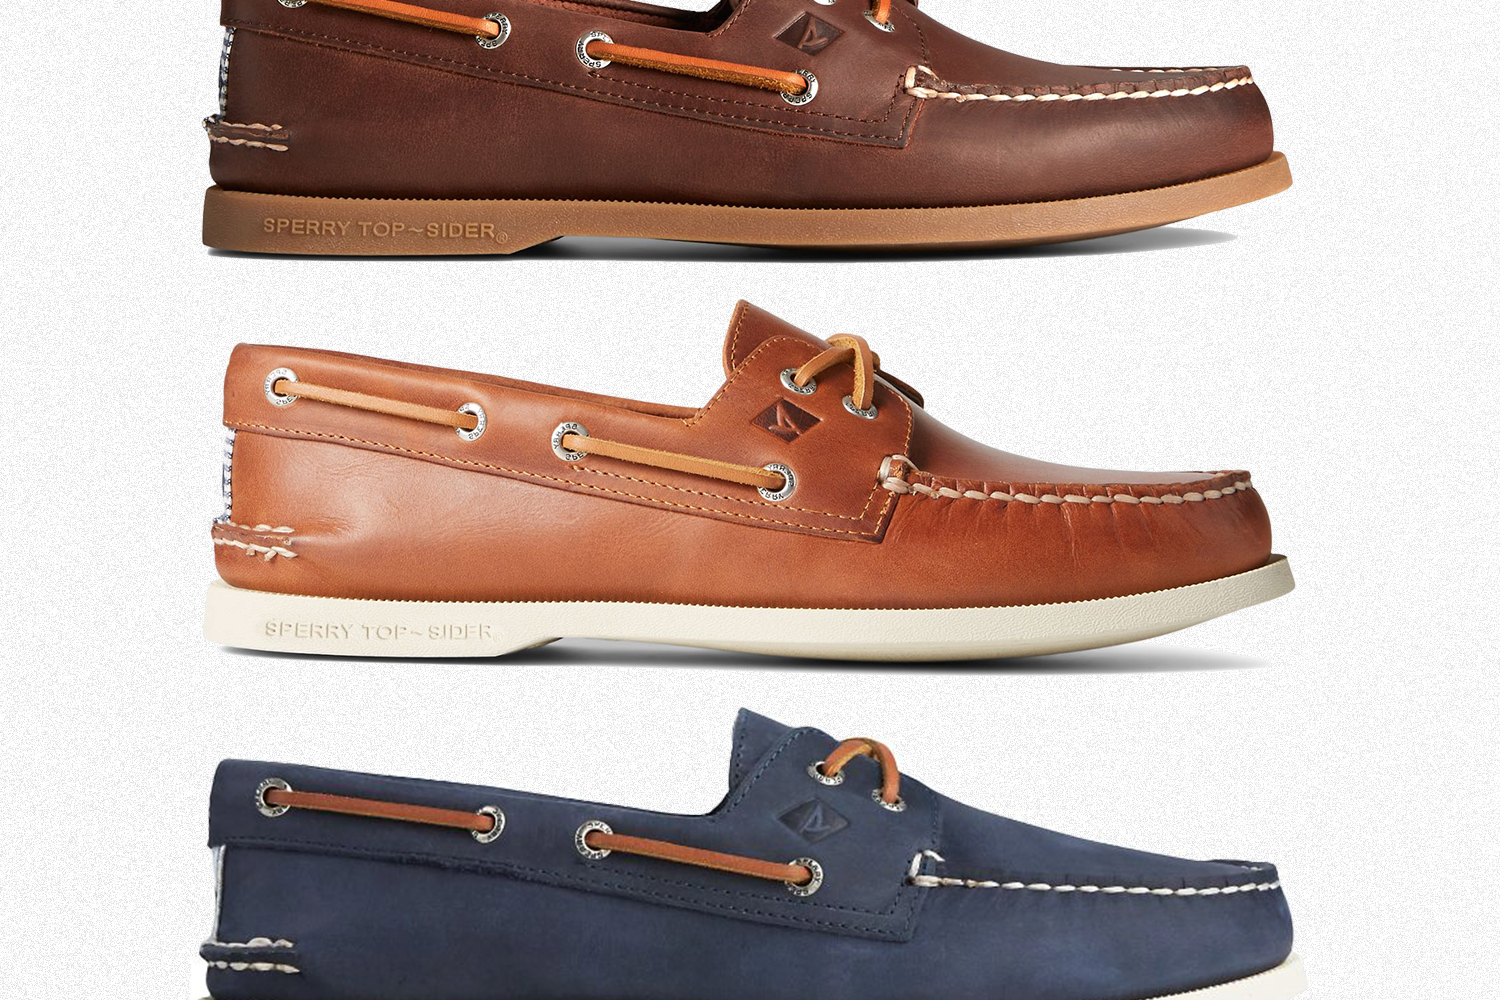 Classic Boat Shoes Are 50% Off Today Only - InsideHook